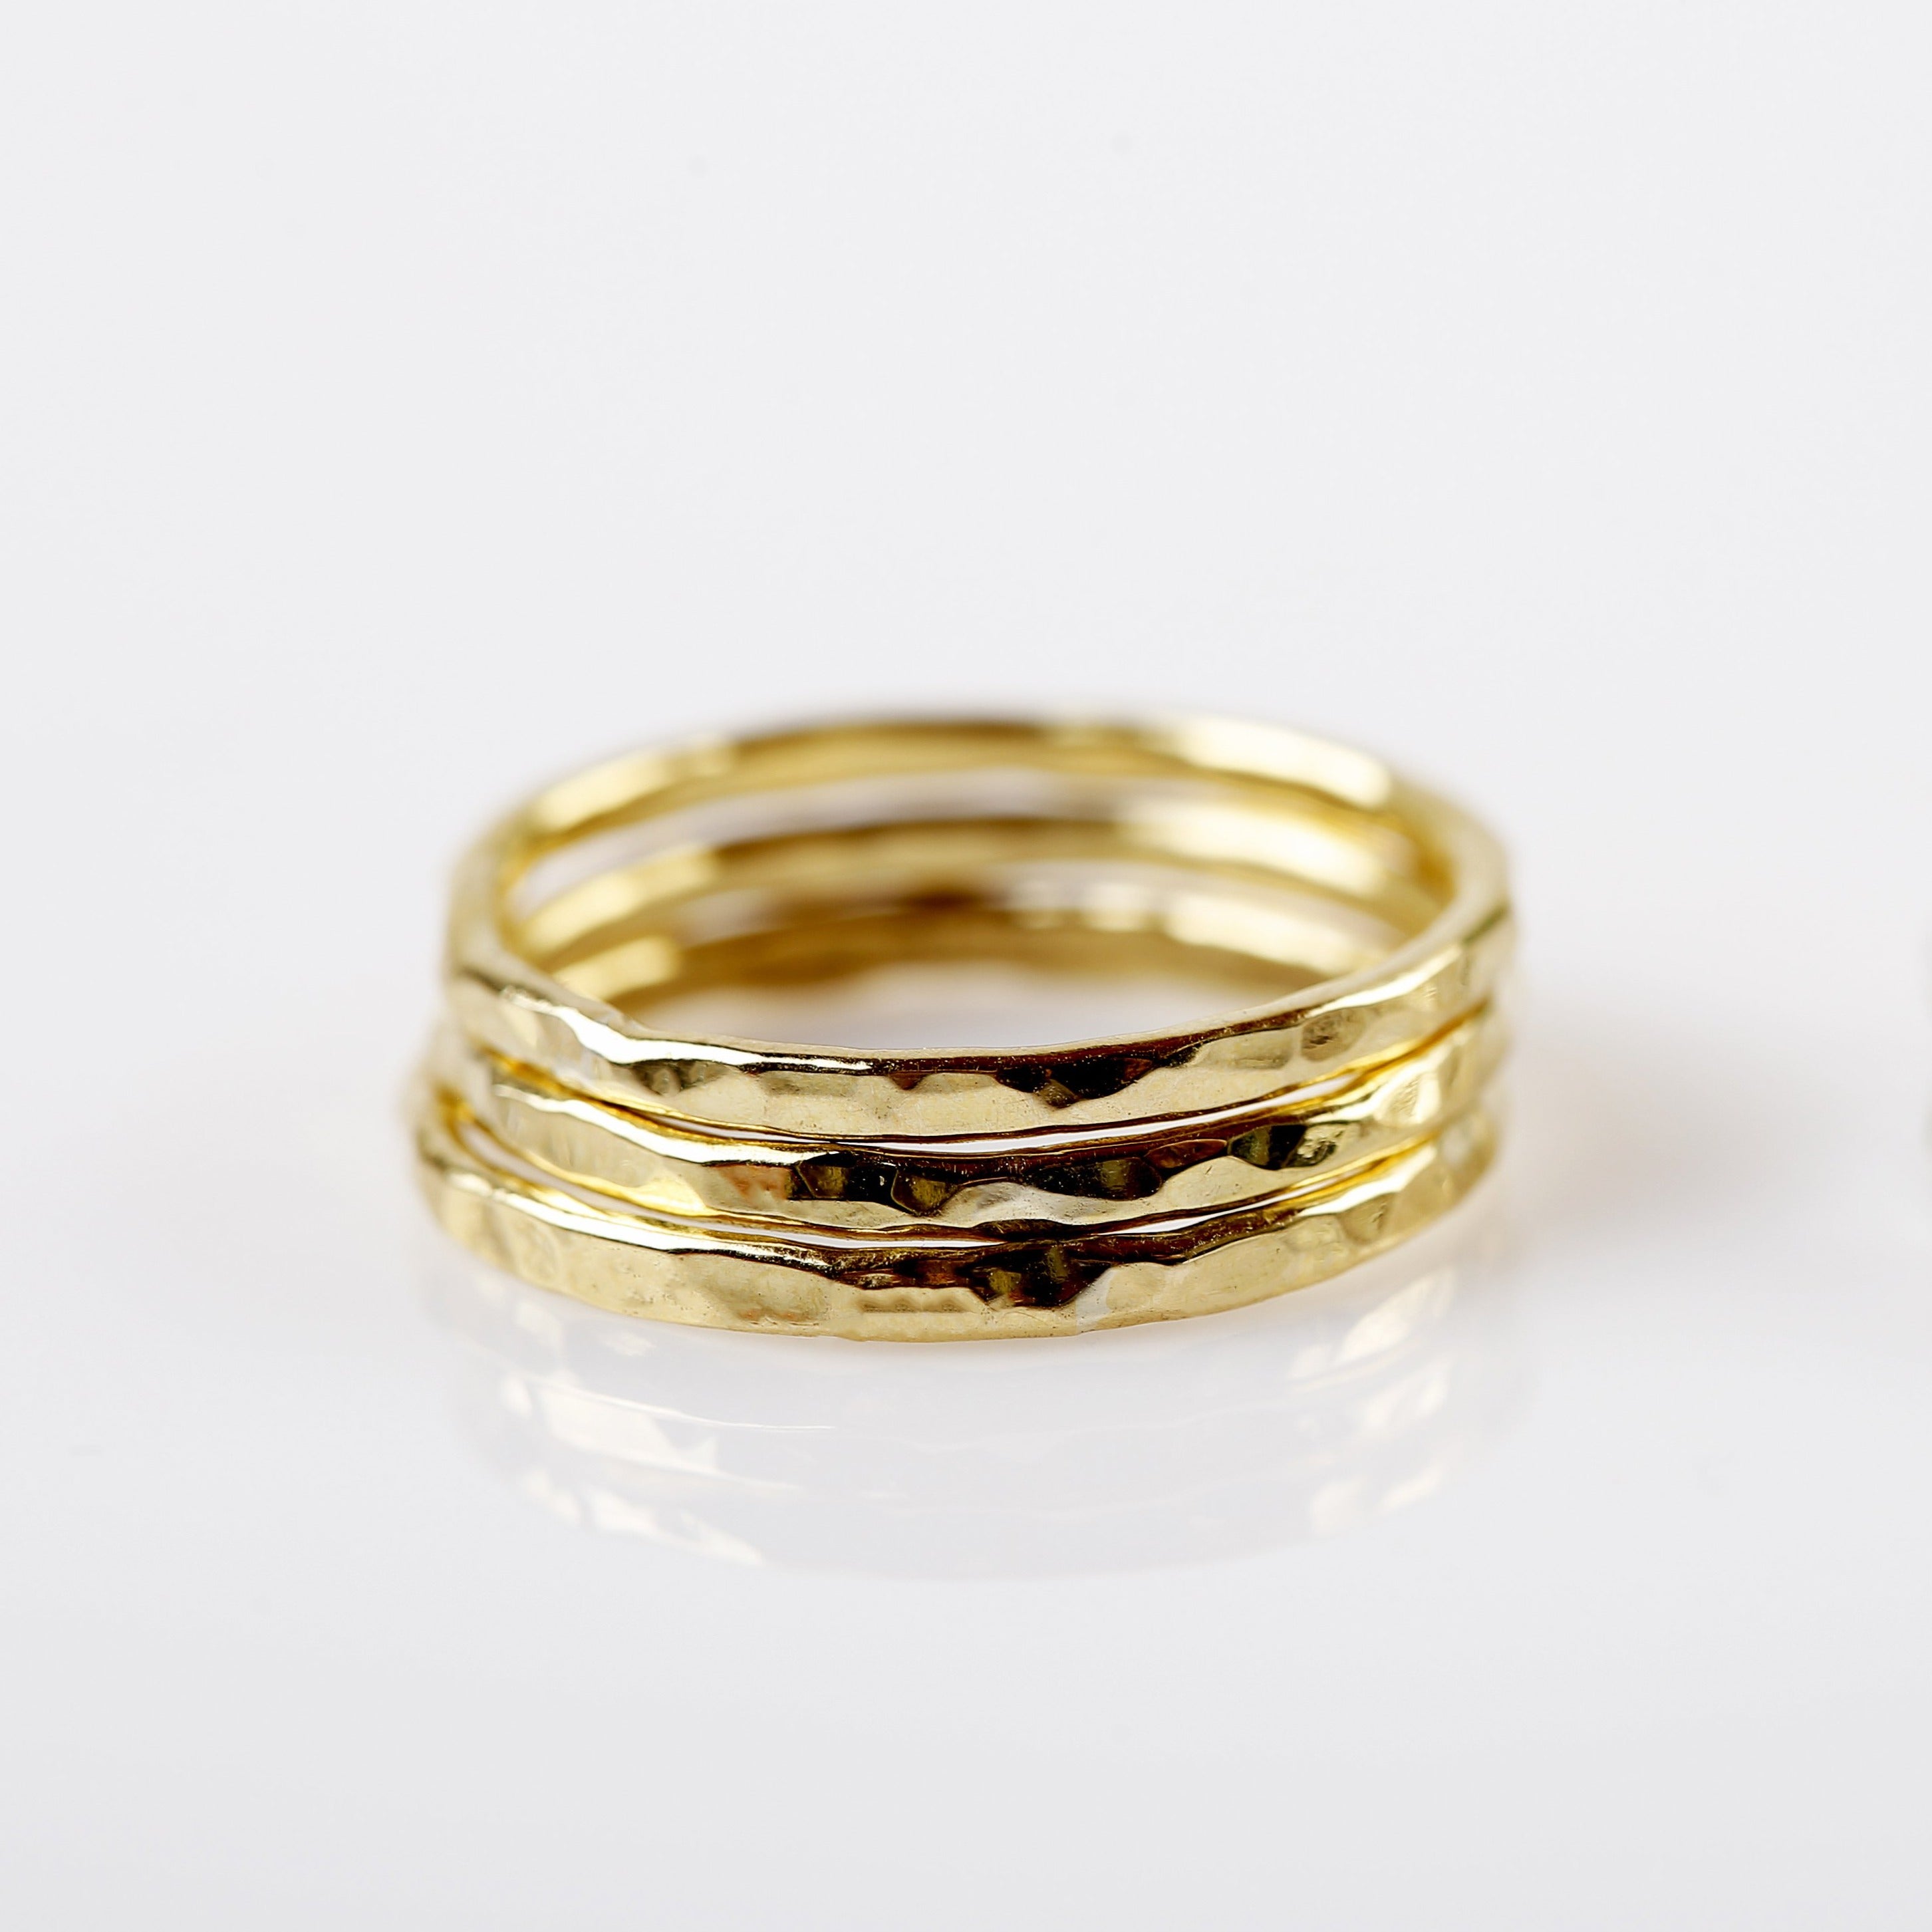 Textured Brass stack rings - set of 3